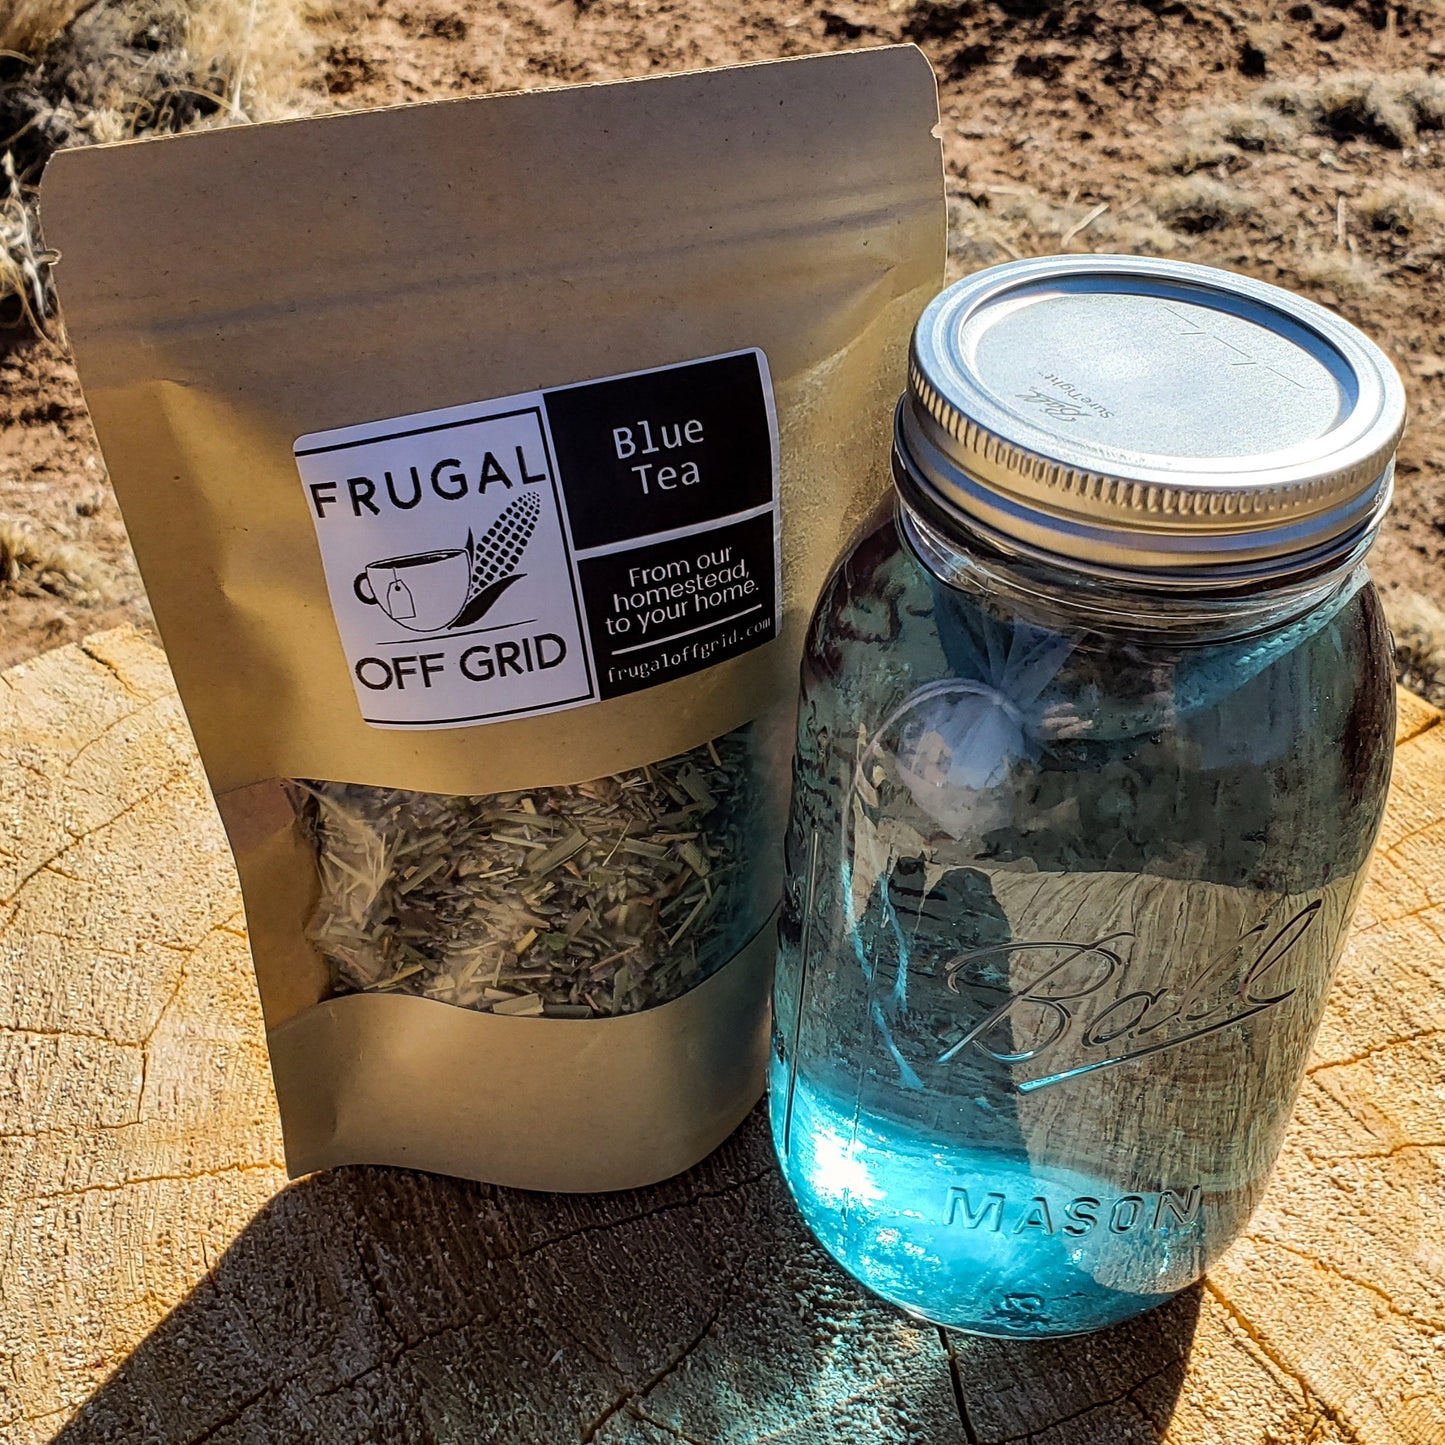 Blue tea blend frugal off grid butterfly pea flower lavender lemon balm made in the U.S by a small business reduce anxiety, pain and stress